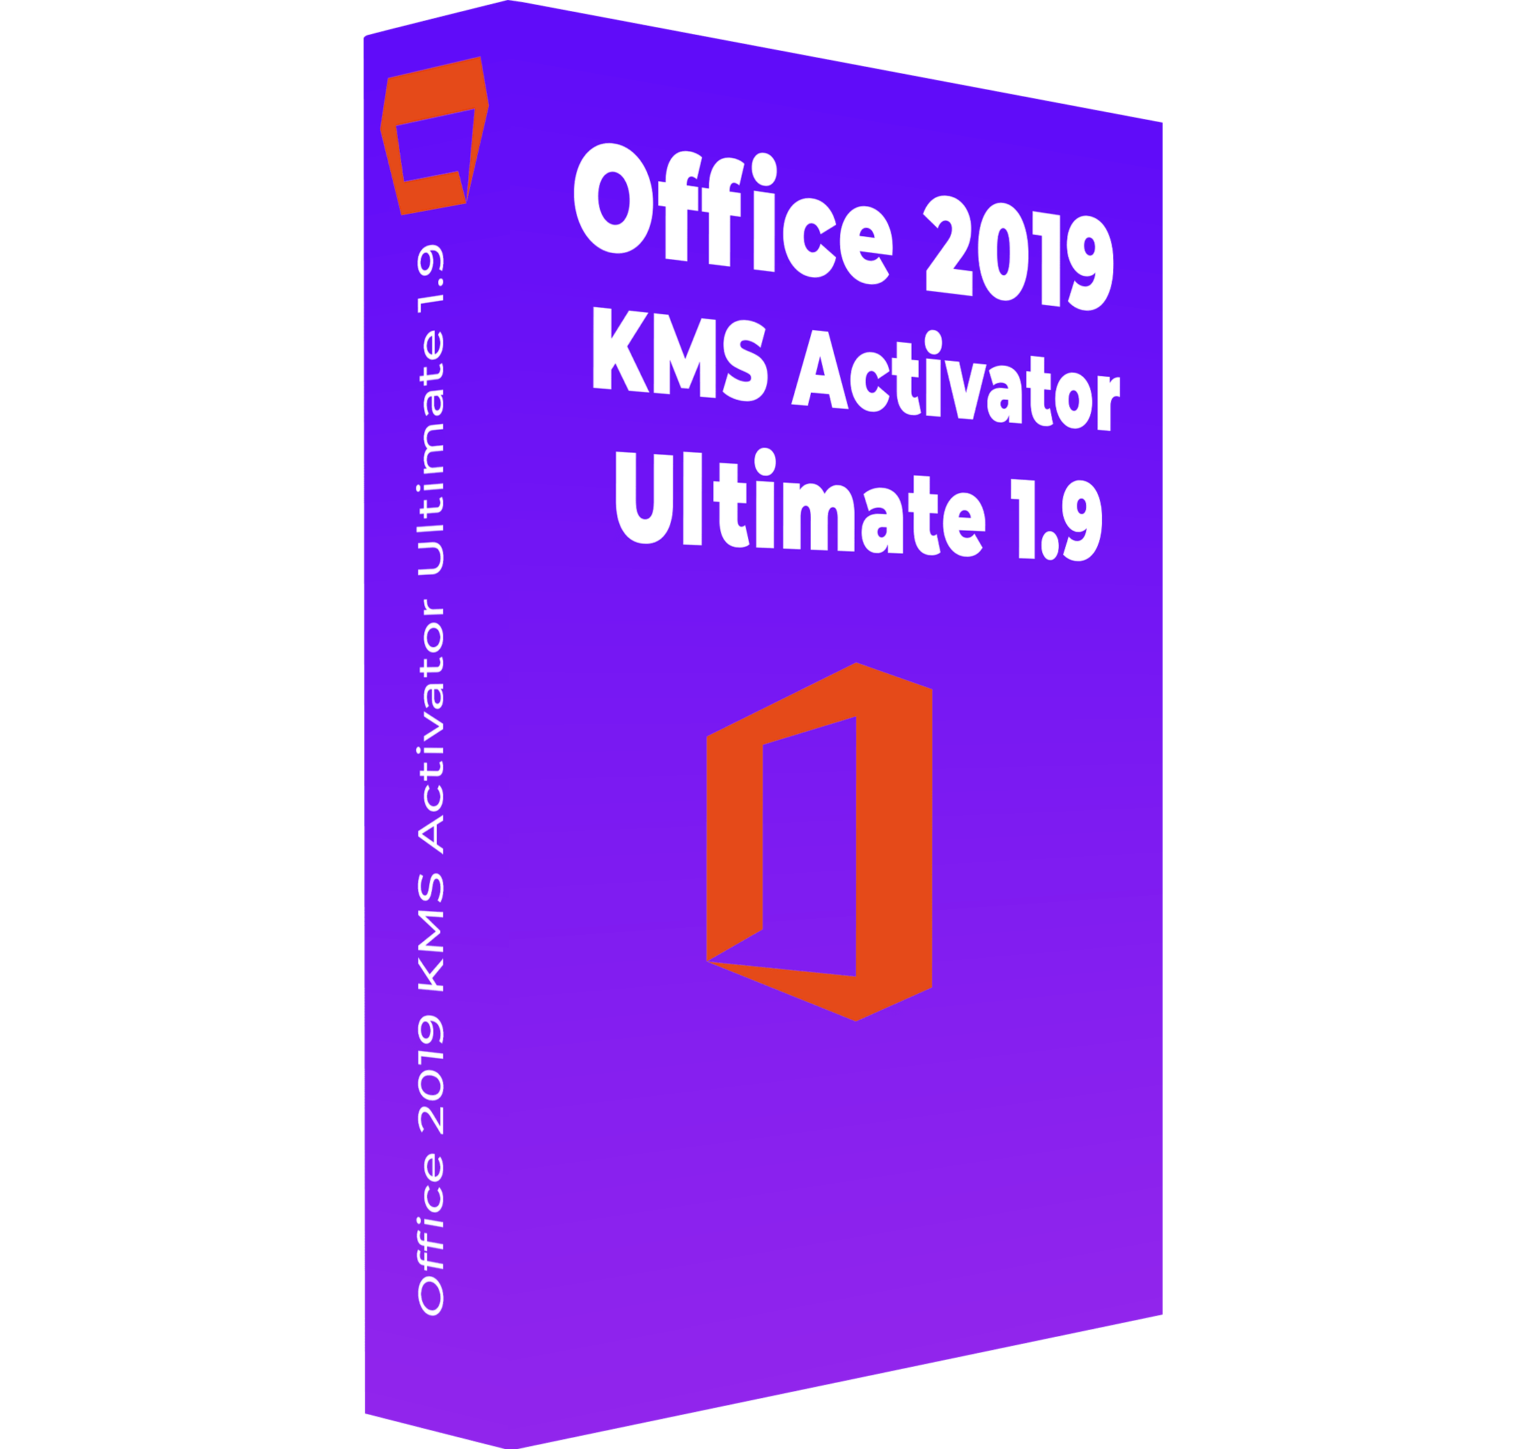 kms activator office 2019 free download